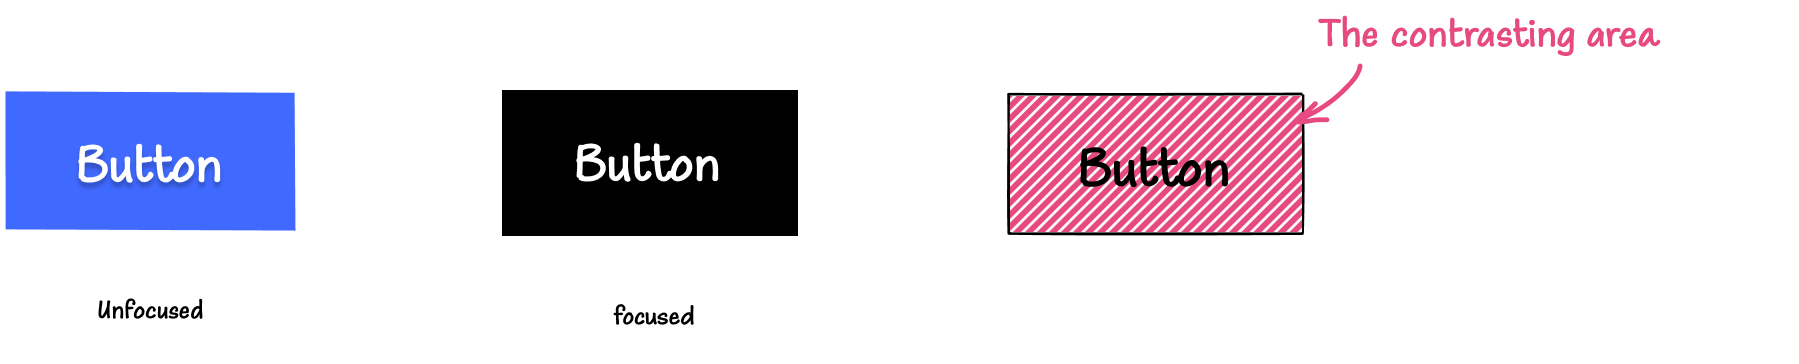 Illustration: On the left is a blue button with a white label in its default, unfocused state. In the middle is the button in its focused state, having a black background instead of blue. On the right, is a button with with a pattern applied to its background area, indicating that this patterned area is the contrasting area.